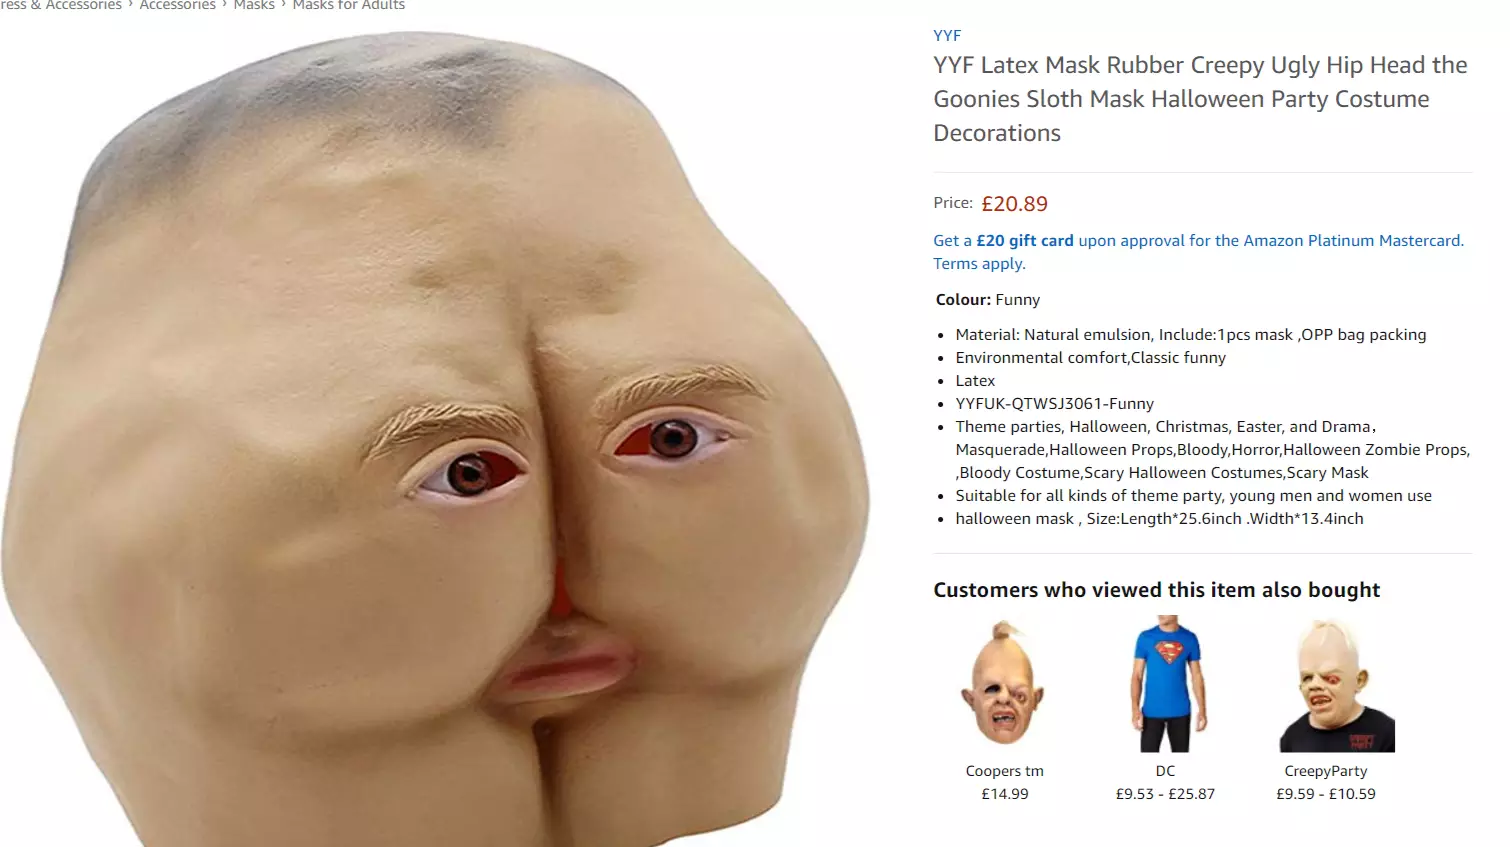 Someone Is Selling A Mask Of Sloth From The Goonies, But It Looks More Like A Bum 